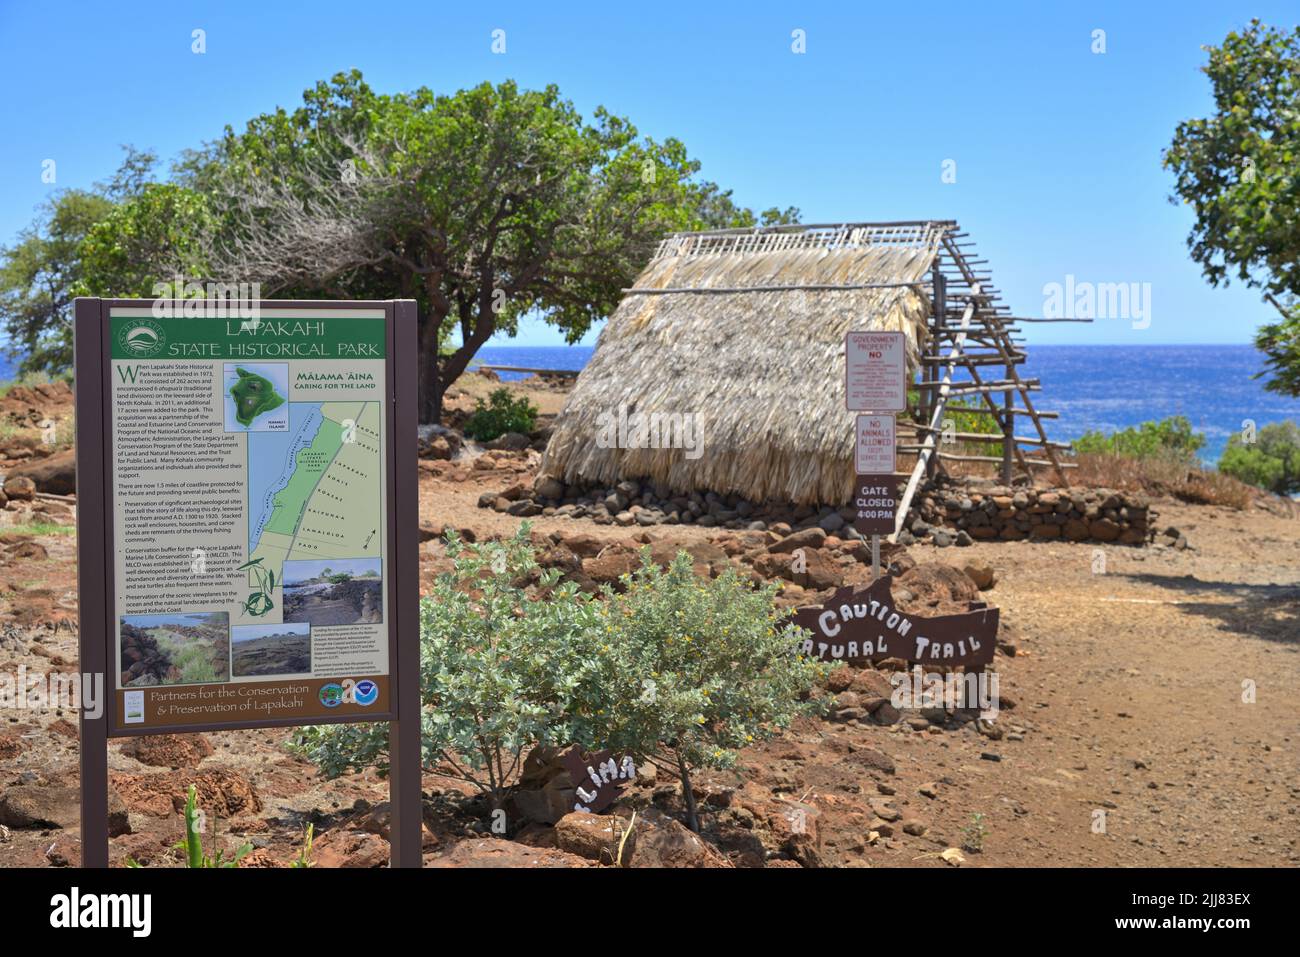 The Lapakahi State Historical Park along the picturesque coastline, north of Kawaihae HI Stock Photo